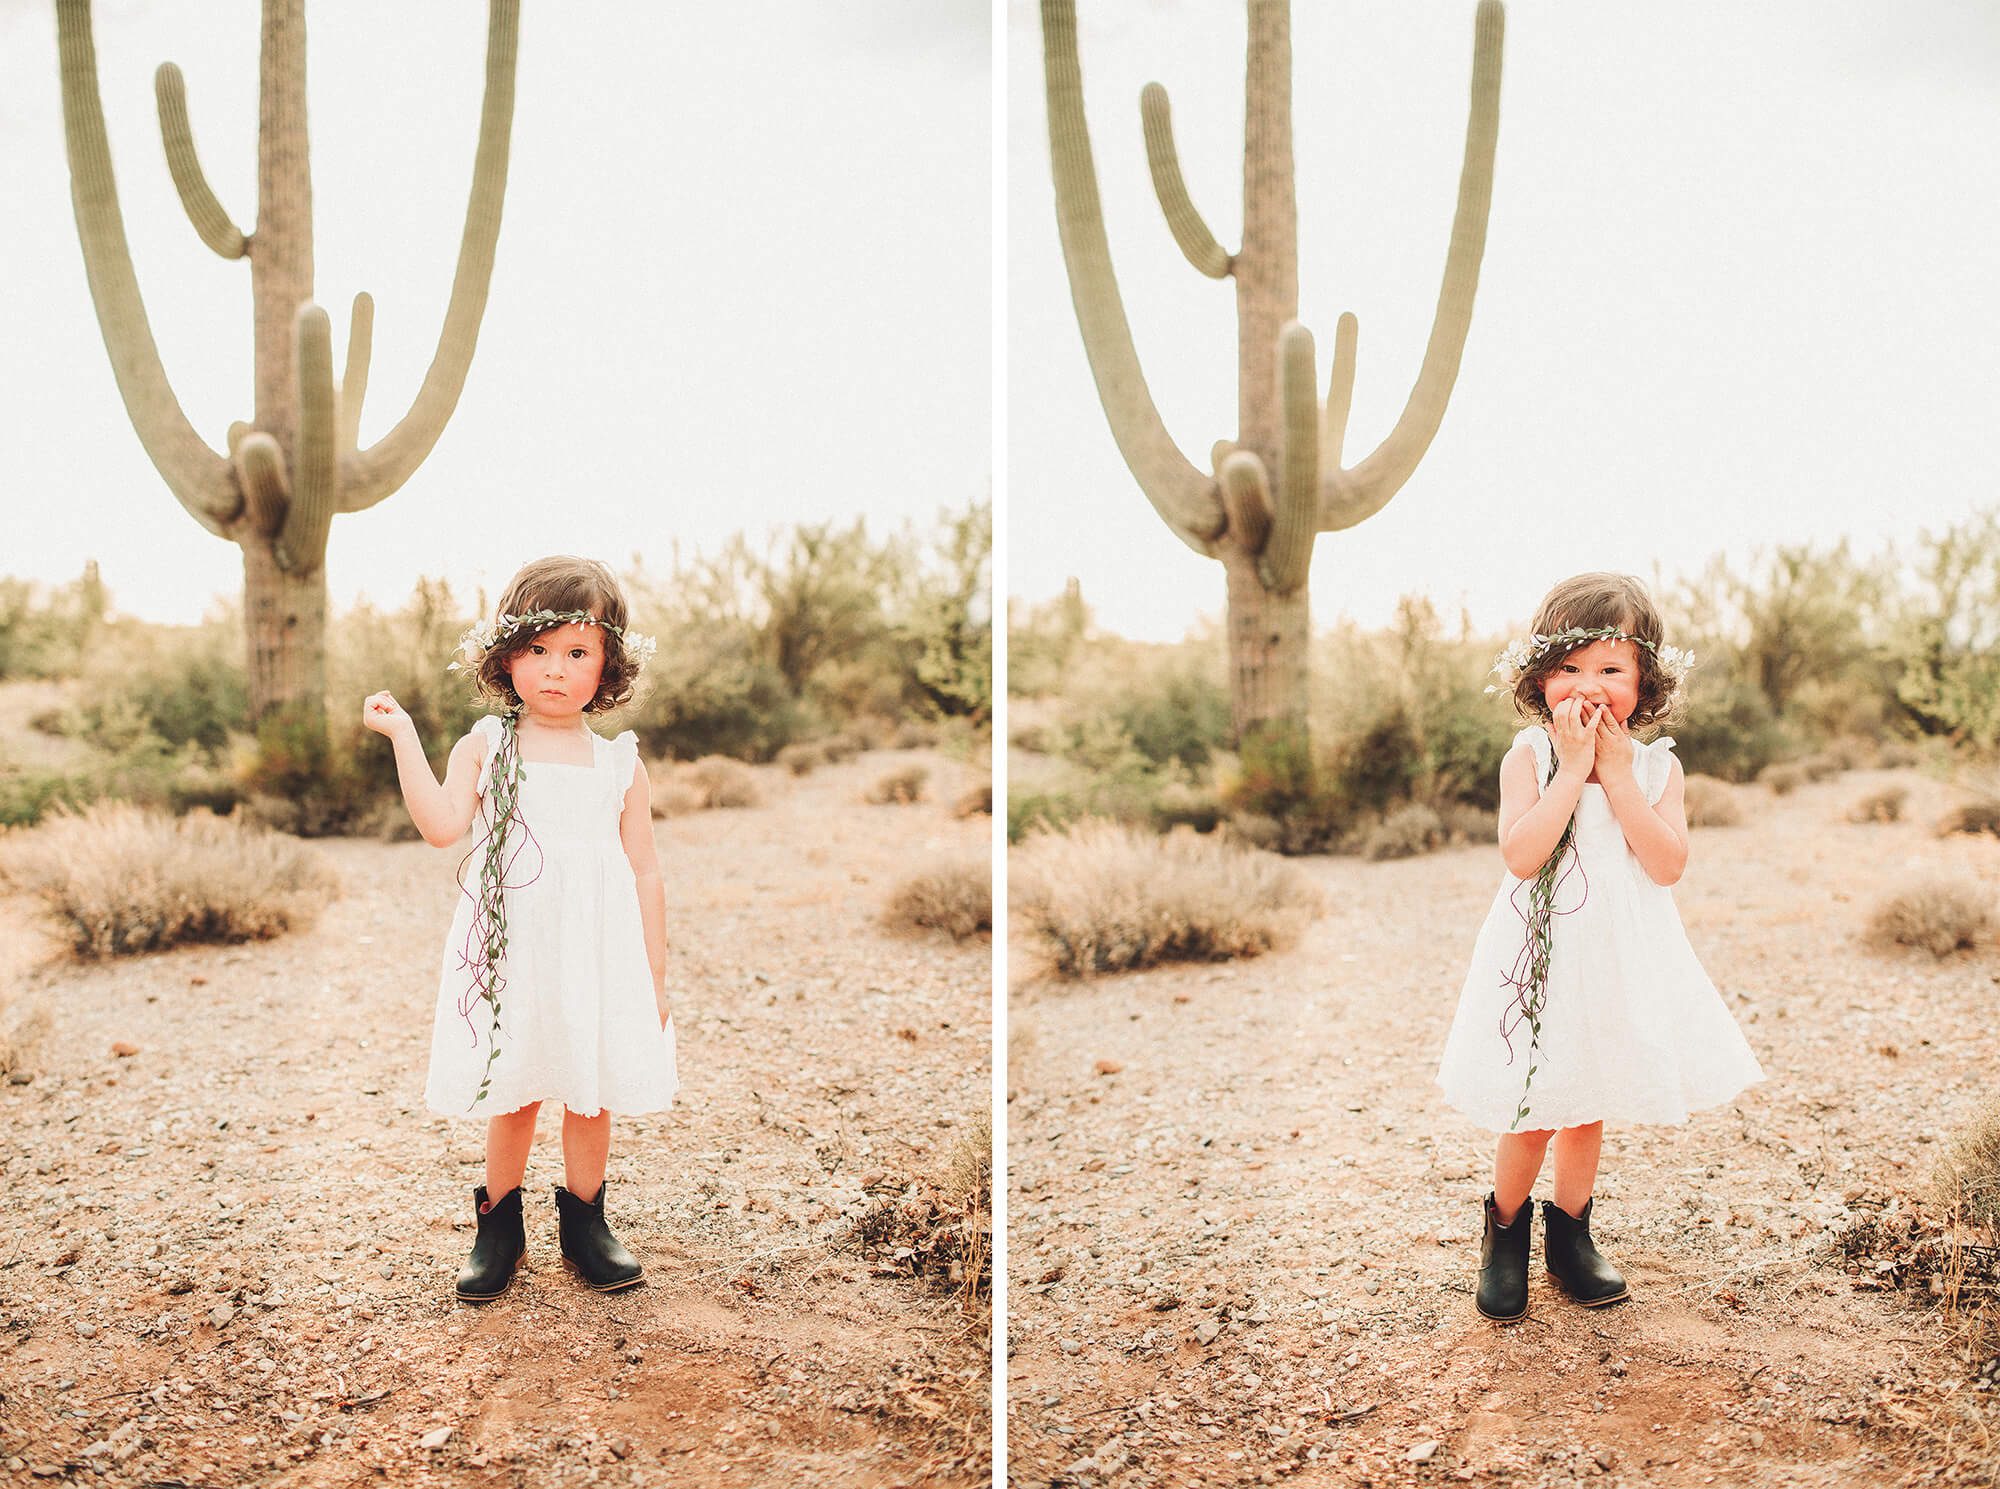 Lots of personality from this beautiful little girl celebrating her second birthday with a desert photoshoot